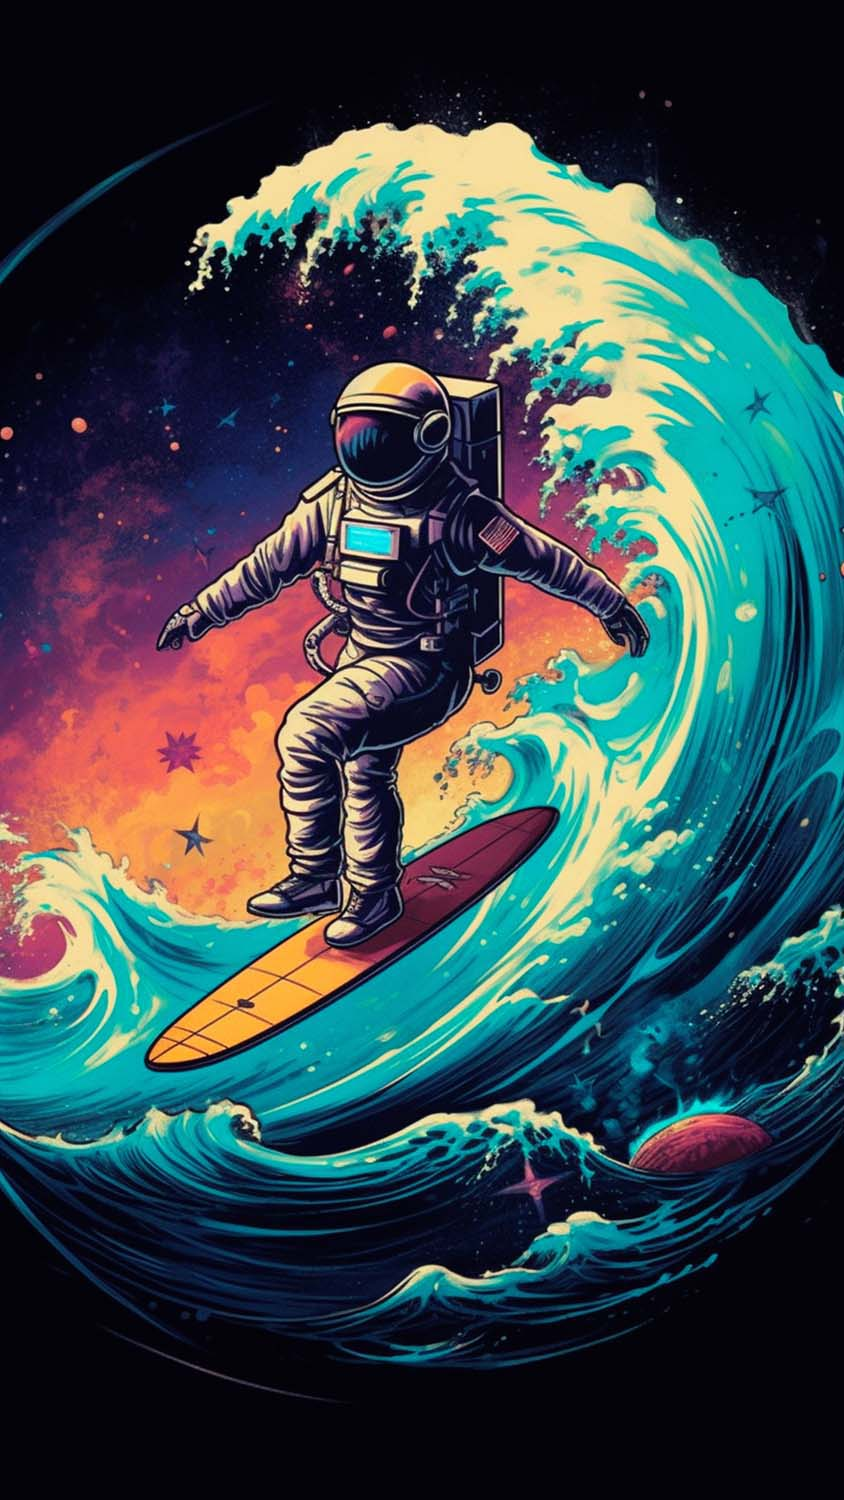 Astronaut with universe in the background Wallpaper 4k Ultra HD ID5544